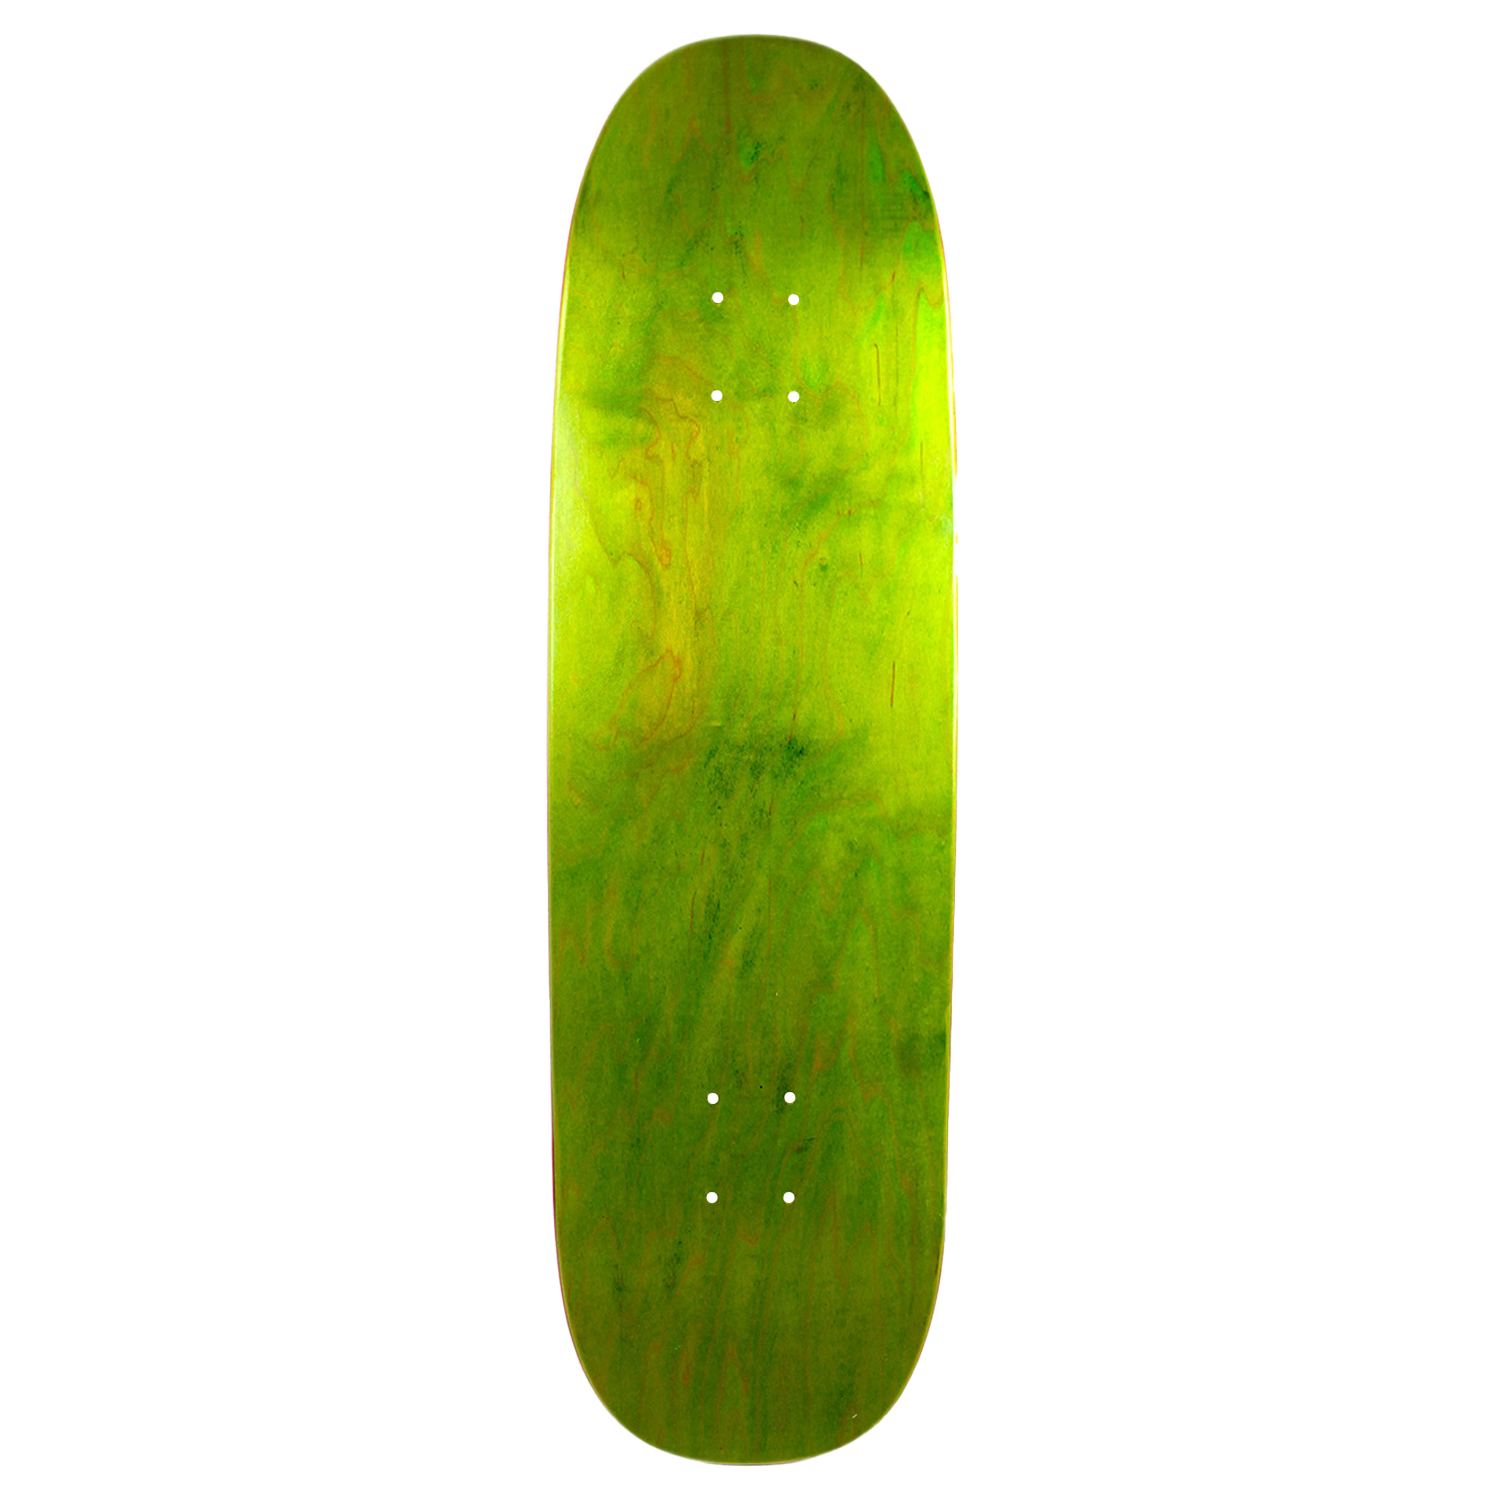 Moose Skateboard Old School Deck Popsicle Nose Stain Lime 8.75in x 32.1in